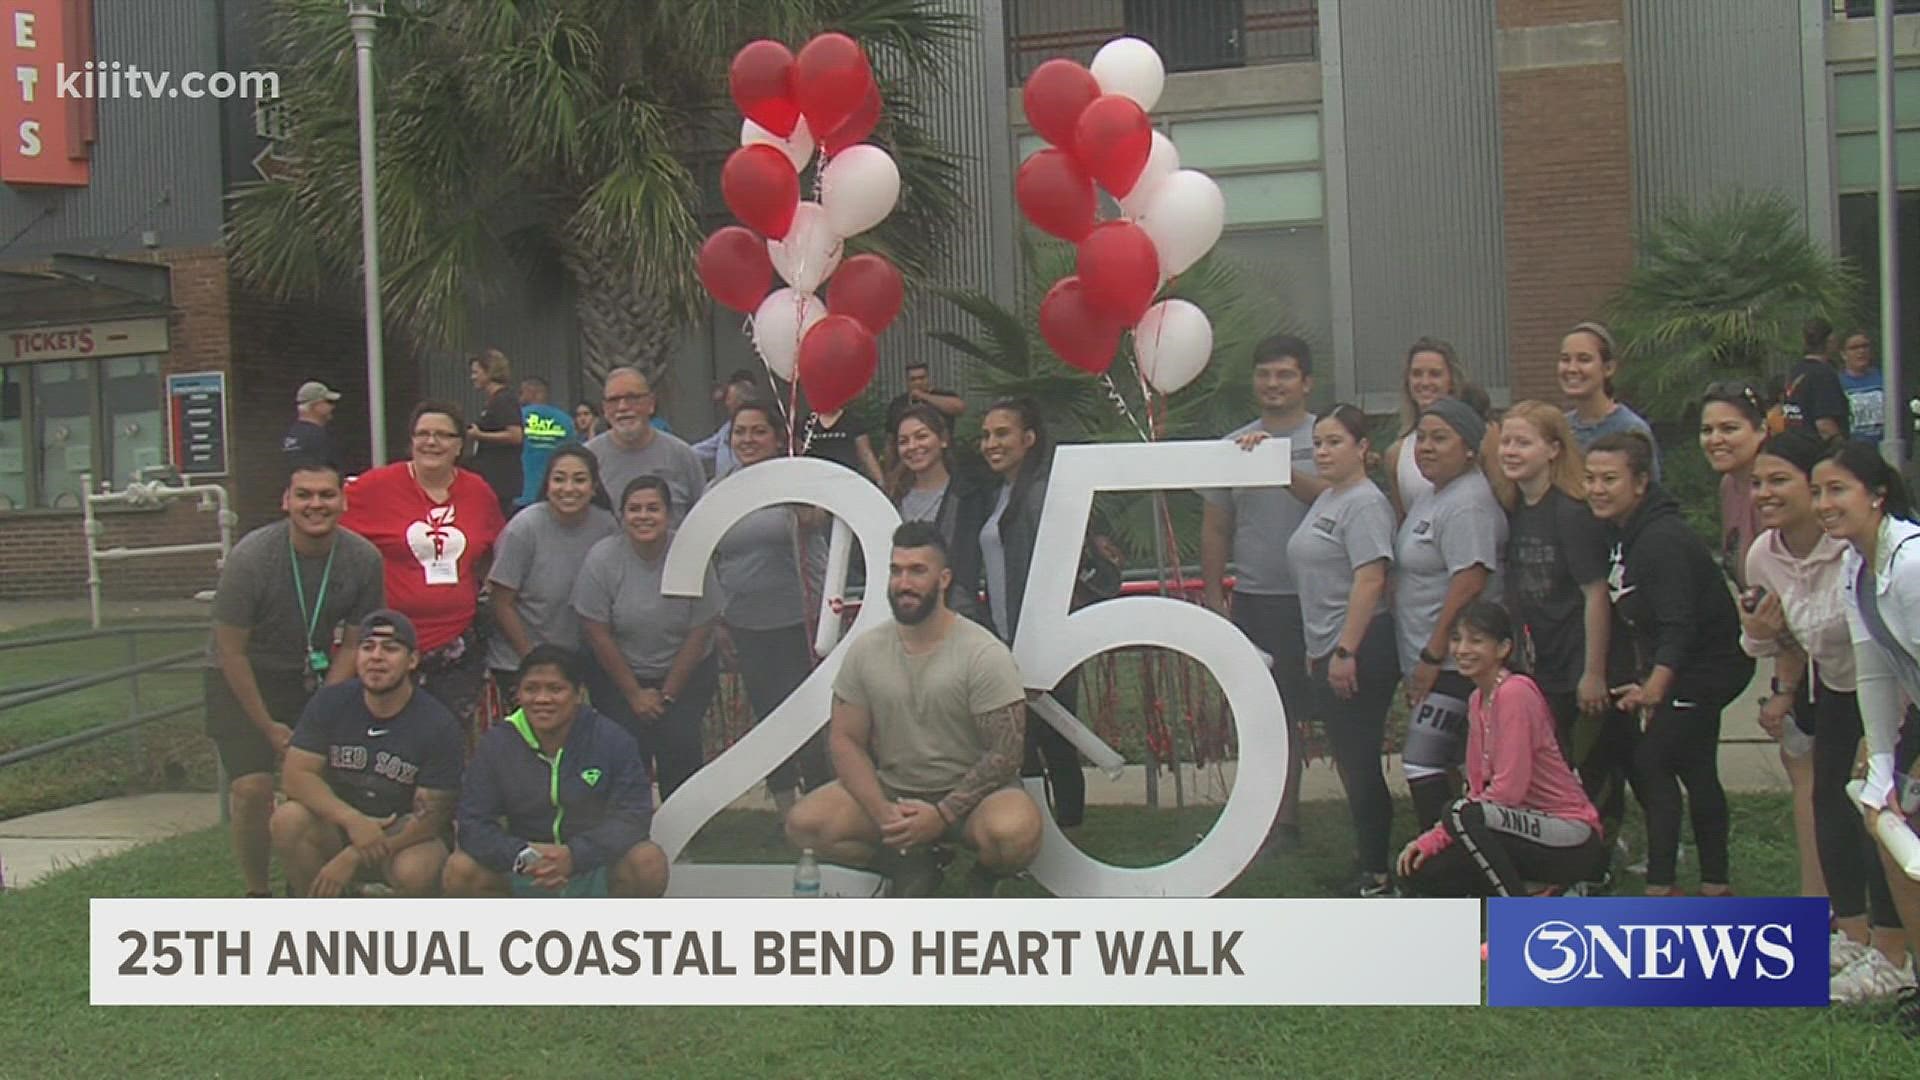 The Coastal Bend Heart Walk is among 300 heart walks held in communities across the nation. The event managed to raise over $400,000 to fight heart disease.